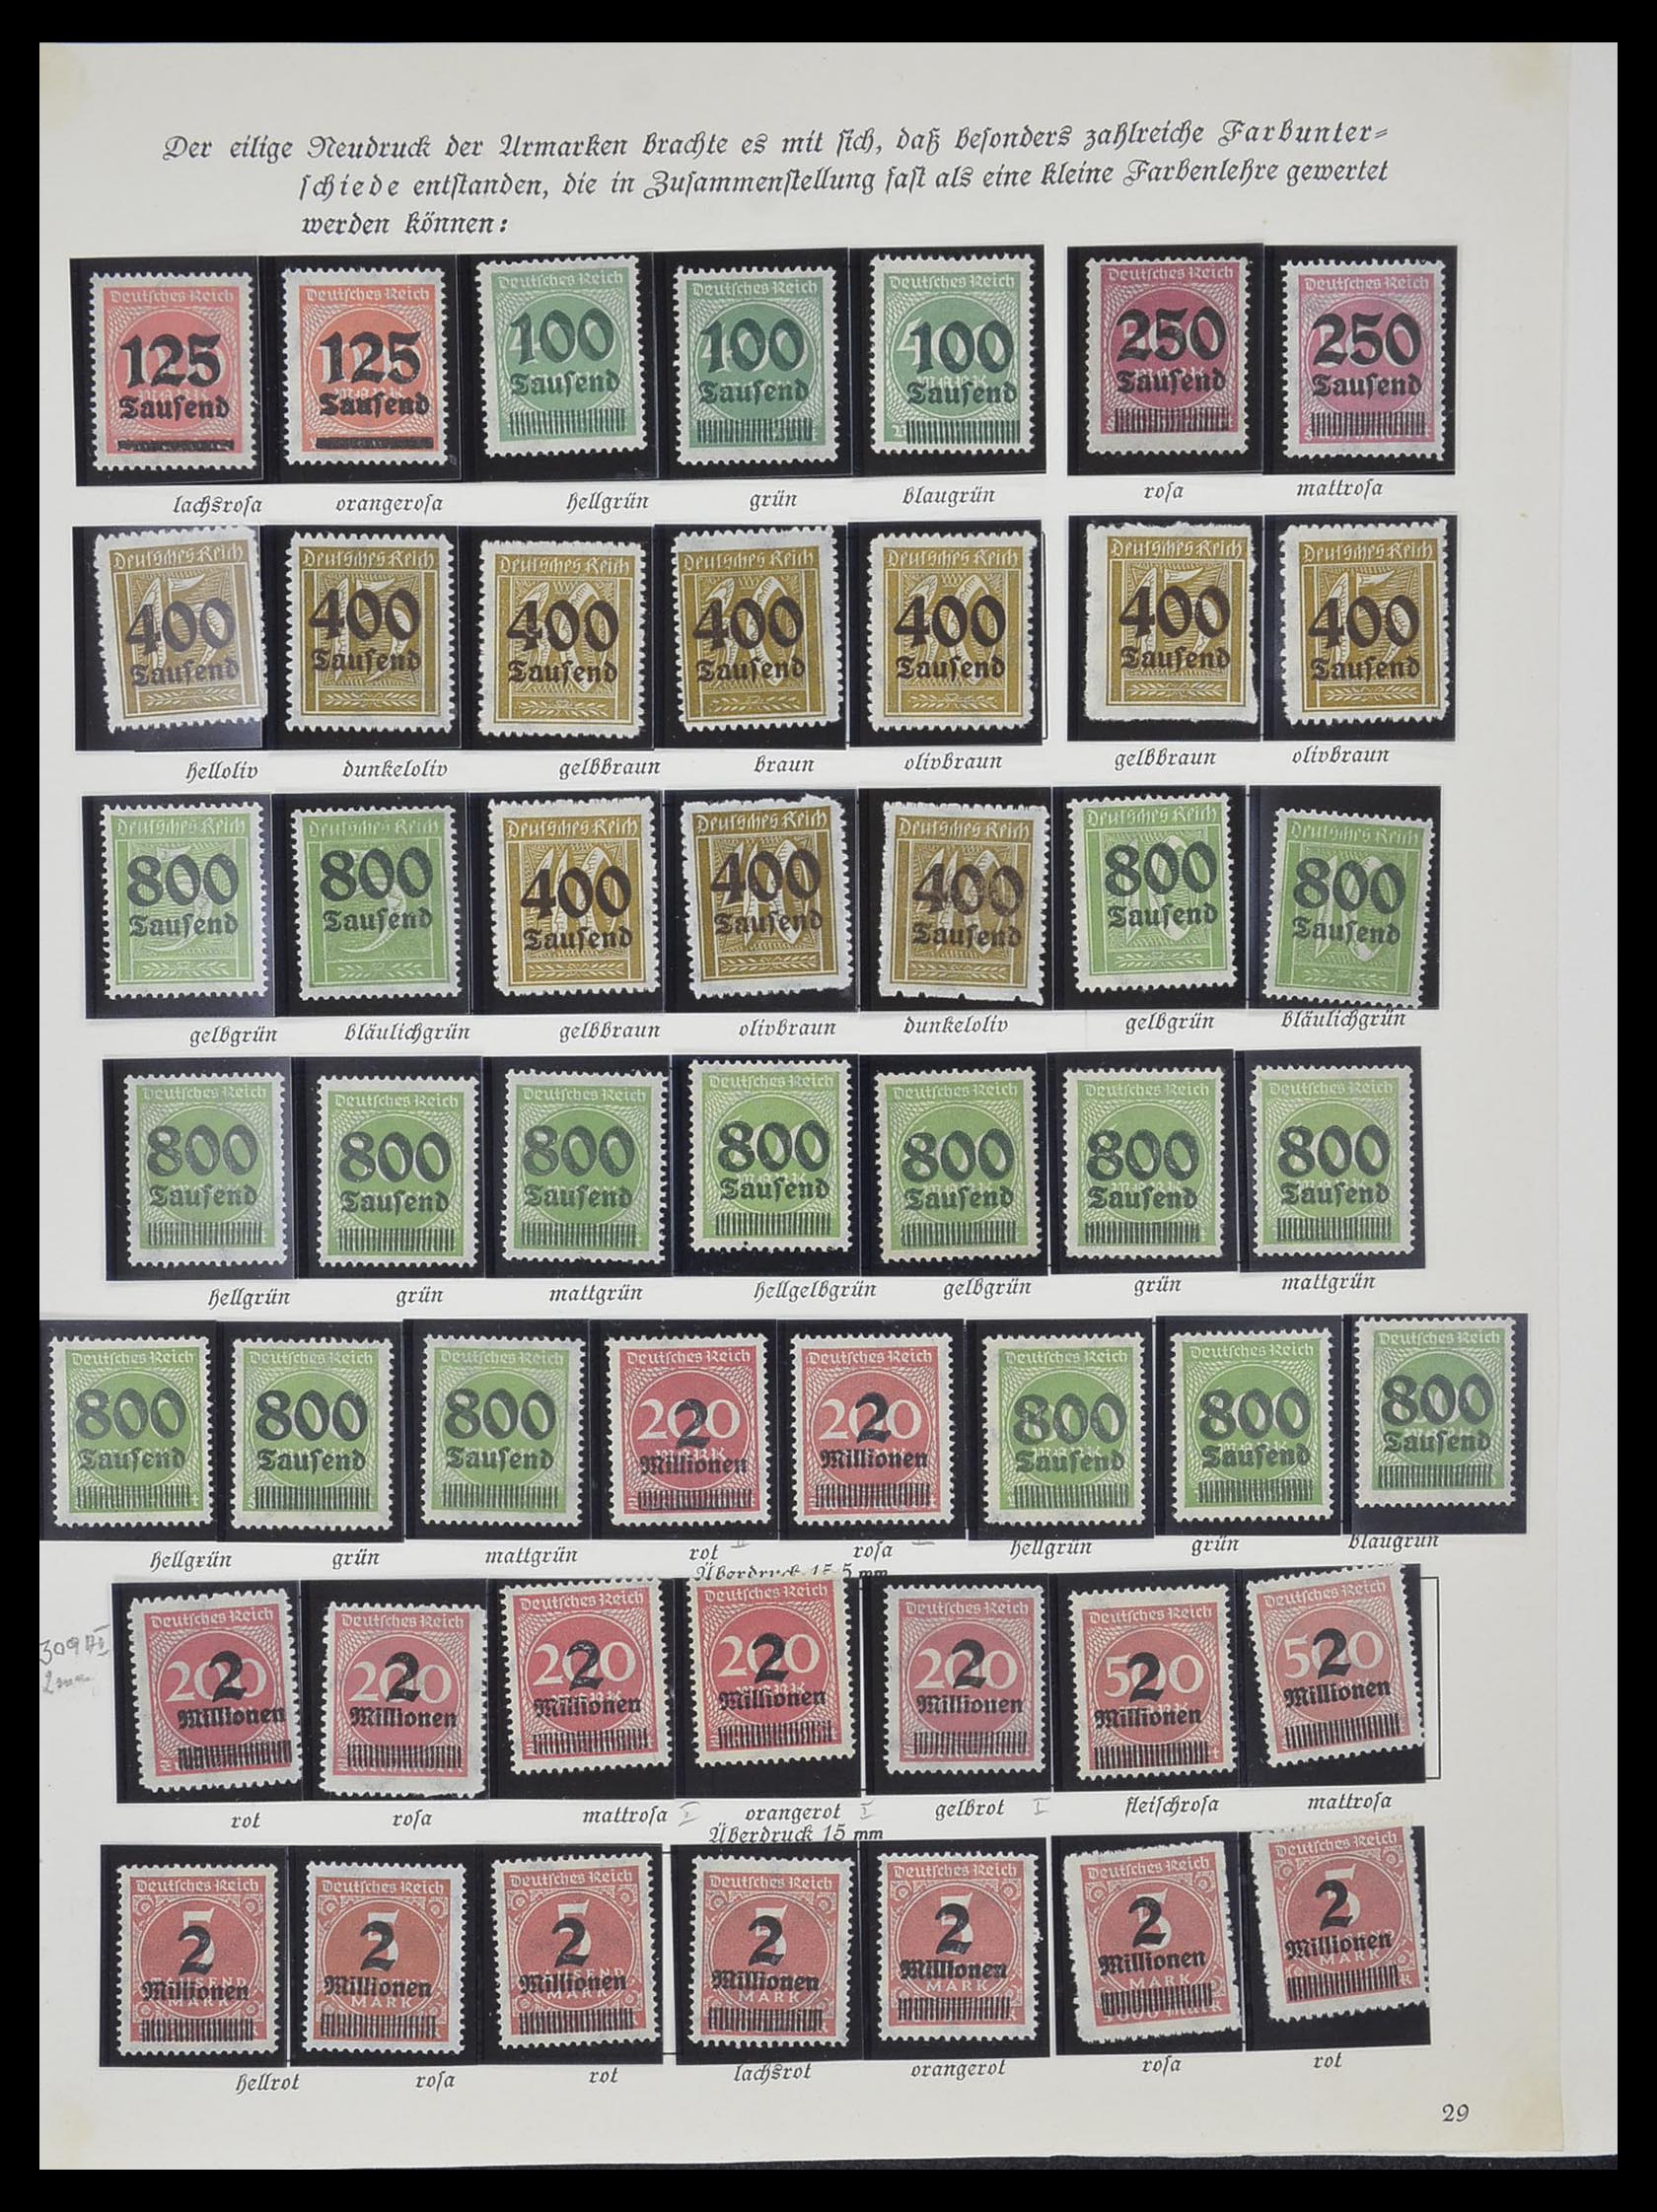 33957 012 - Stamp collection 33957 German Reich infla 1923.